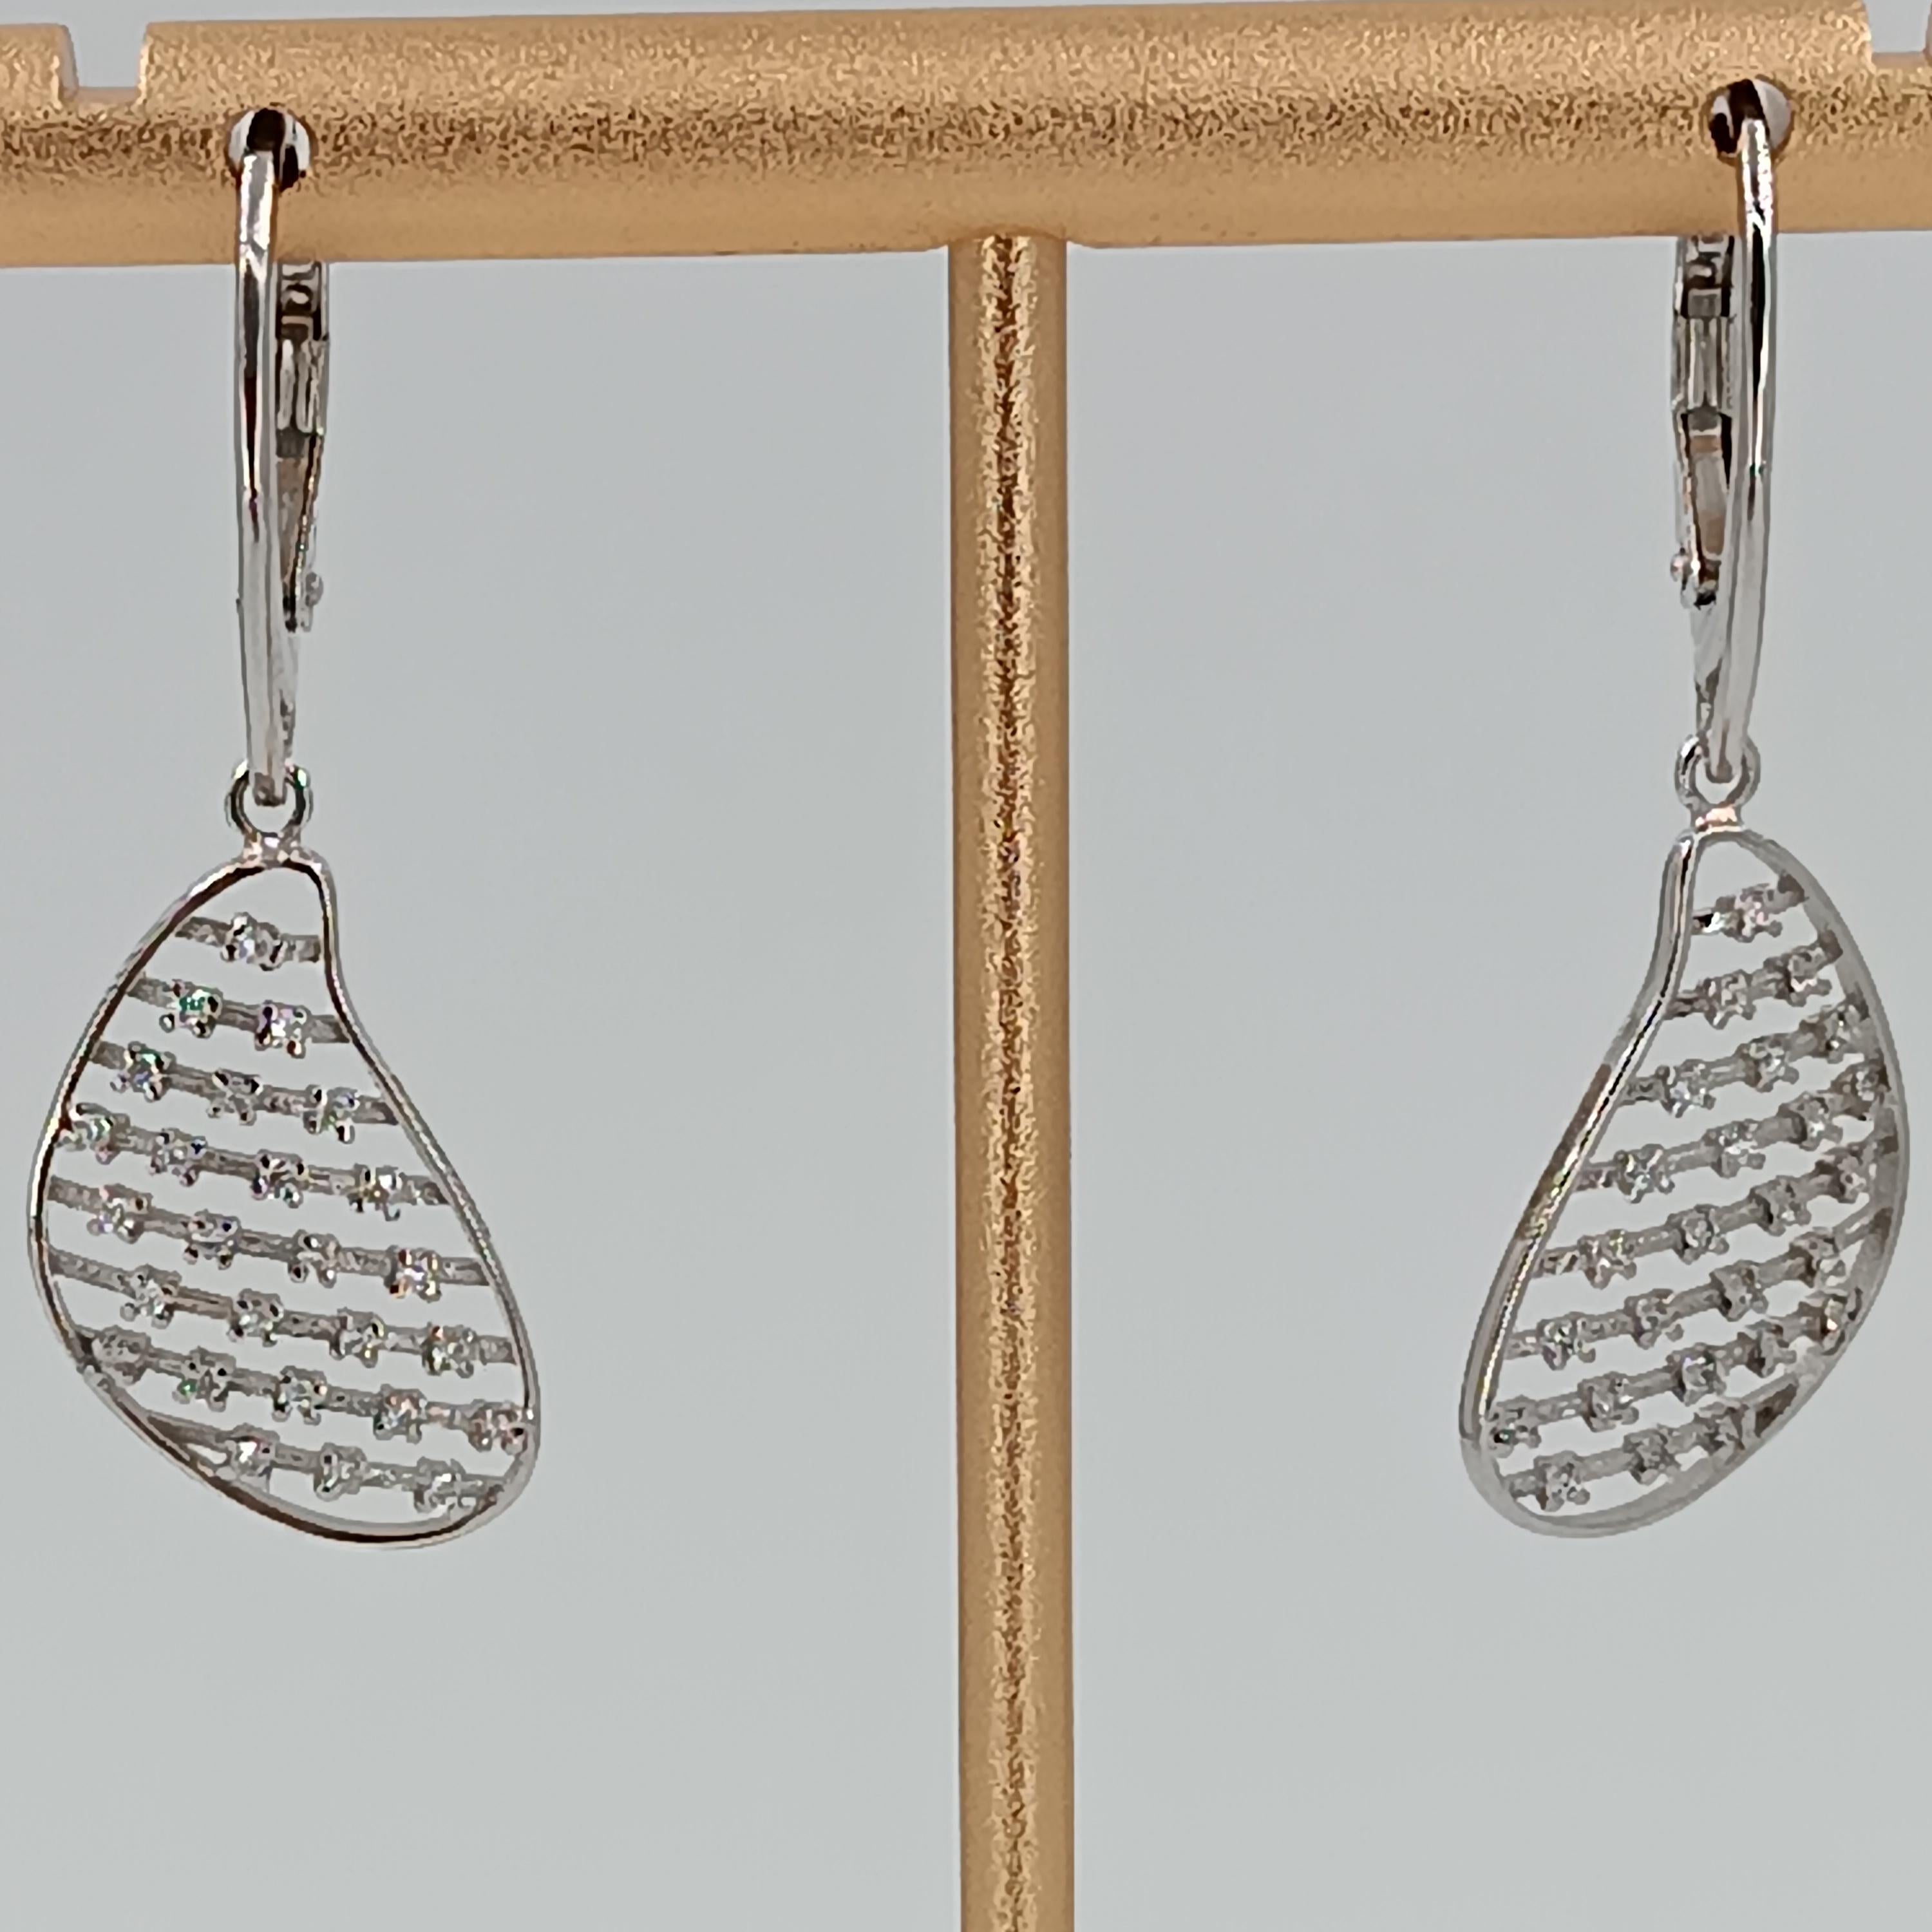 This wonderful Leo Milano earrings from our Palestro  collection shows in every detail a very complicate yet perfectly done workmanship. The earrings are in 18 carat white gold .The earrings weight 3.40 grams the total diamonds  are  0.26 carats.